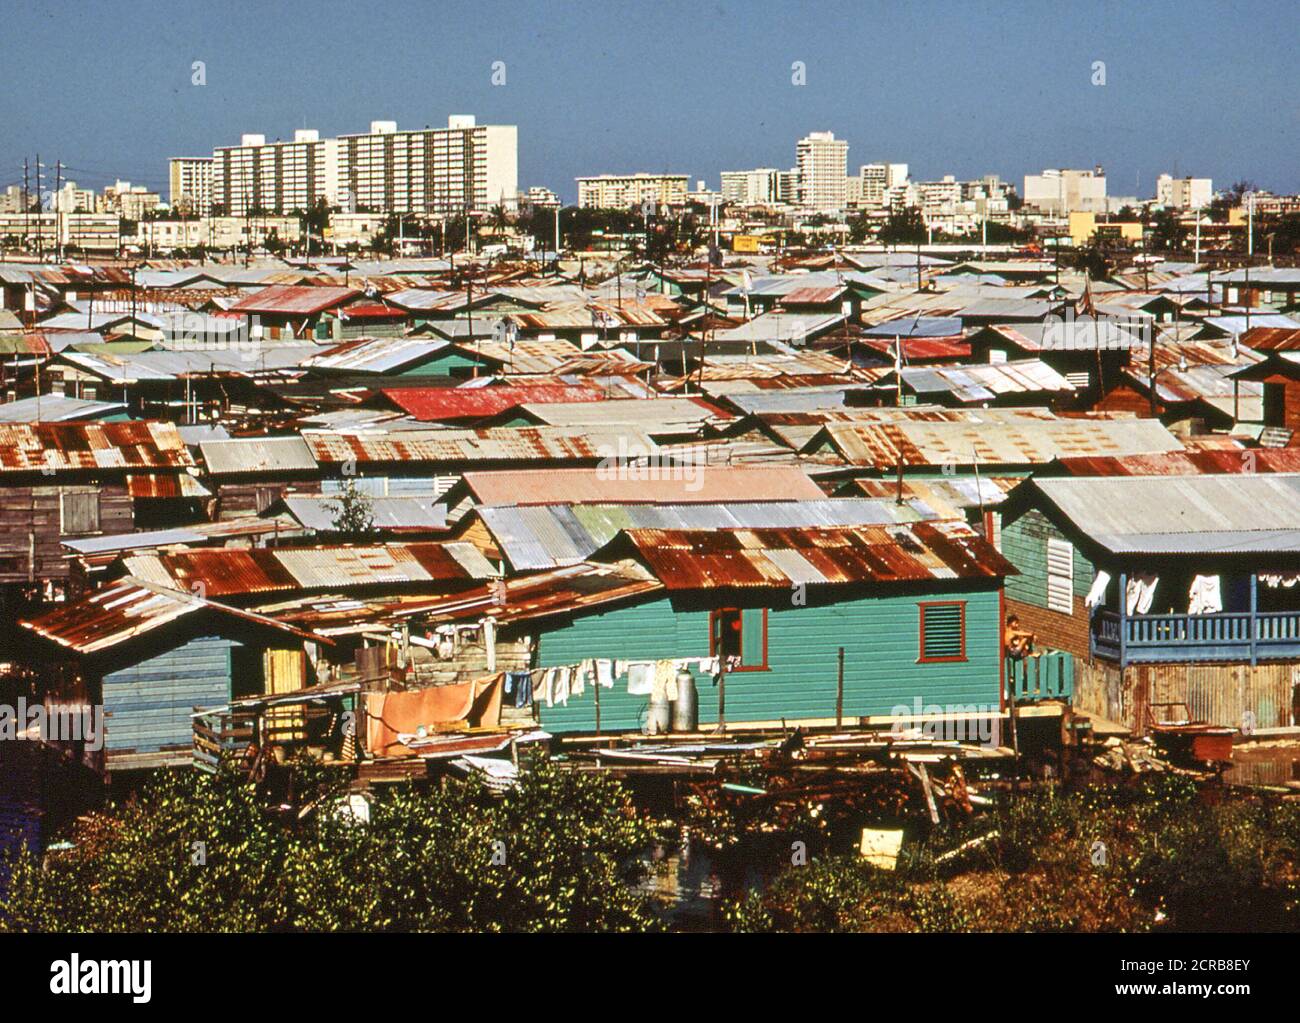 Modern Buildings Tower over the Shanties Crowded Along the Martin Pena Canal February 1973 San Juan, Puerto Rico Stock Photo